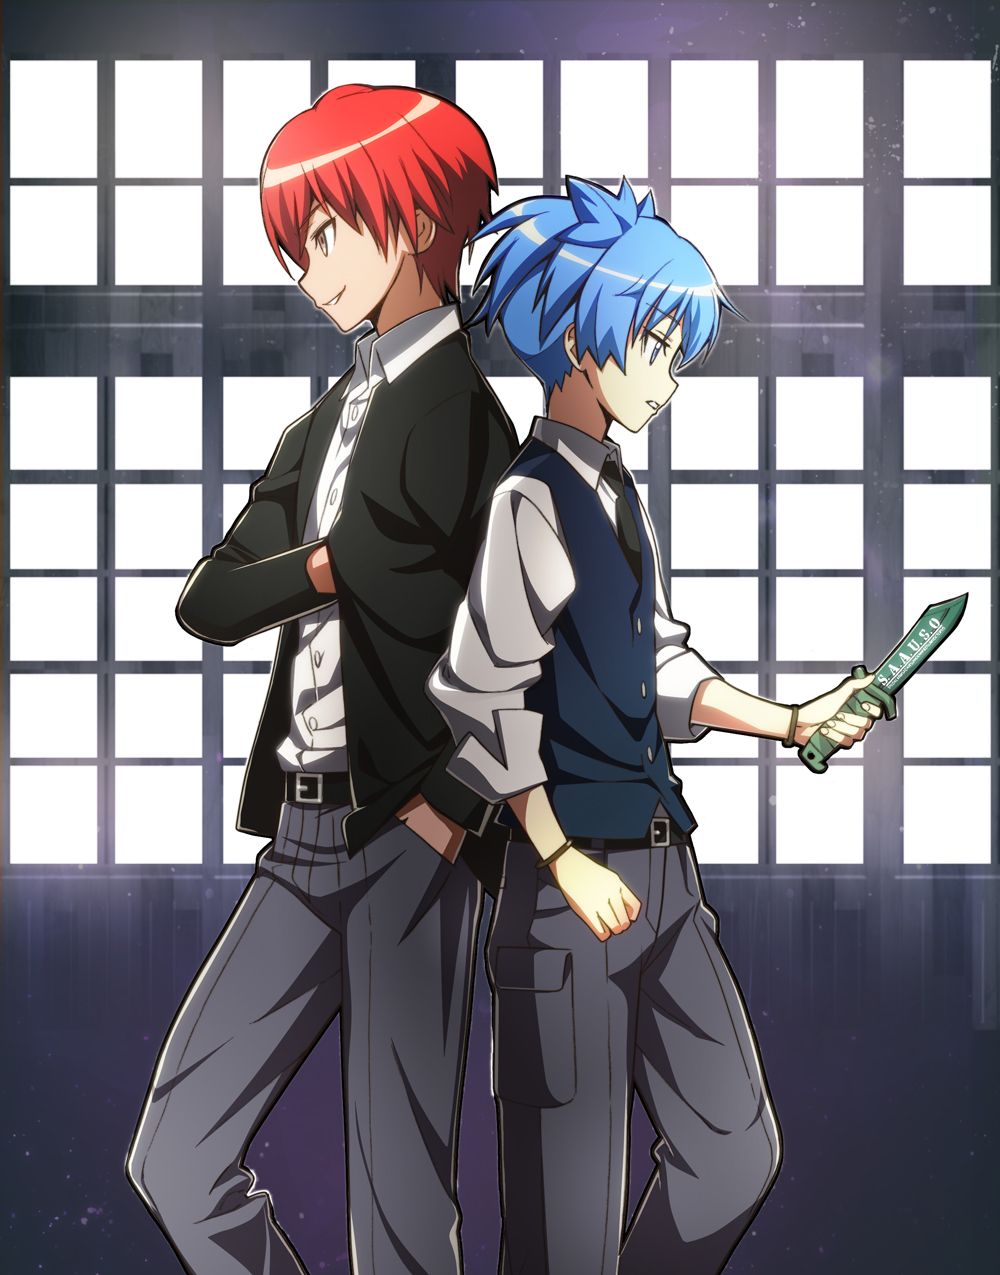 Is Assassination Classroom any good? Review